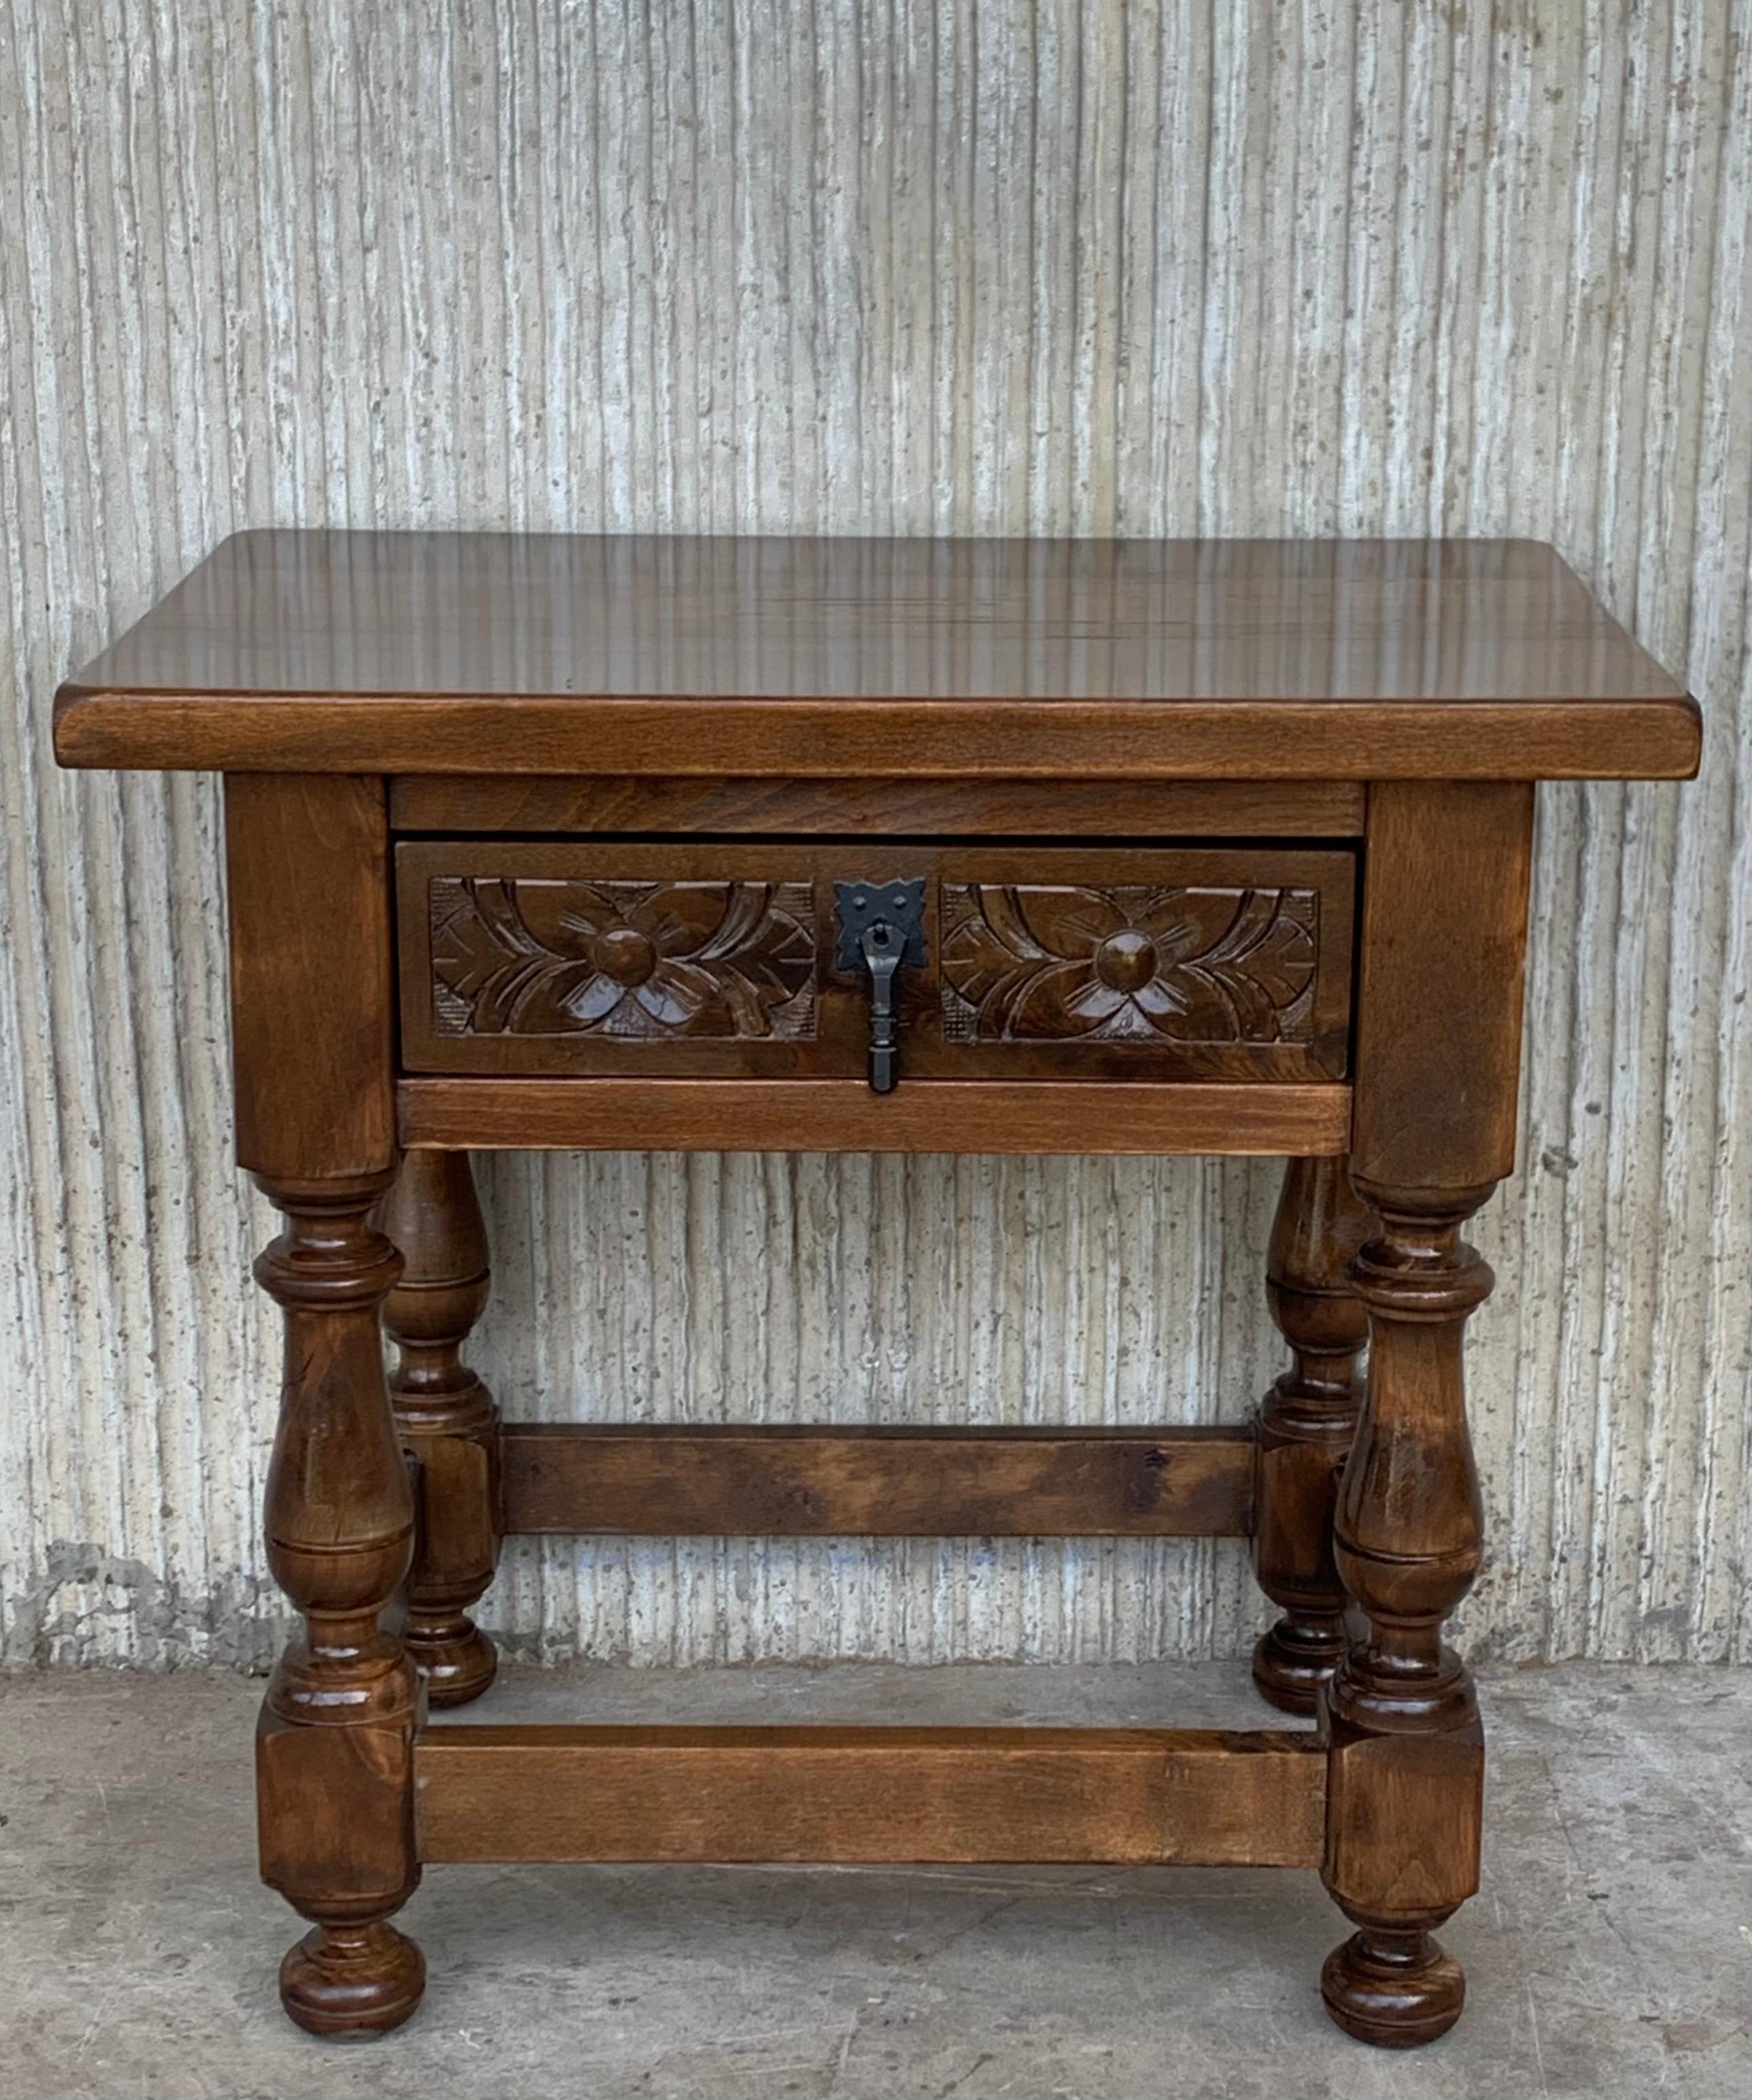 20th century pair of Spanish nightstands in solid walnut with carved drawer and iron hardware.
Beautiful tables that you can use like a nightstands or side tables, end tables, or table lamp.